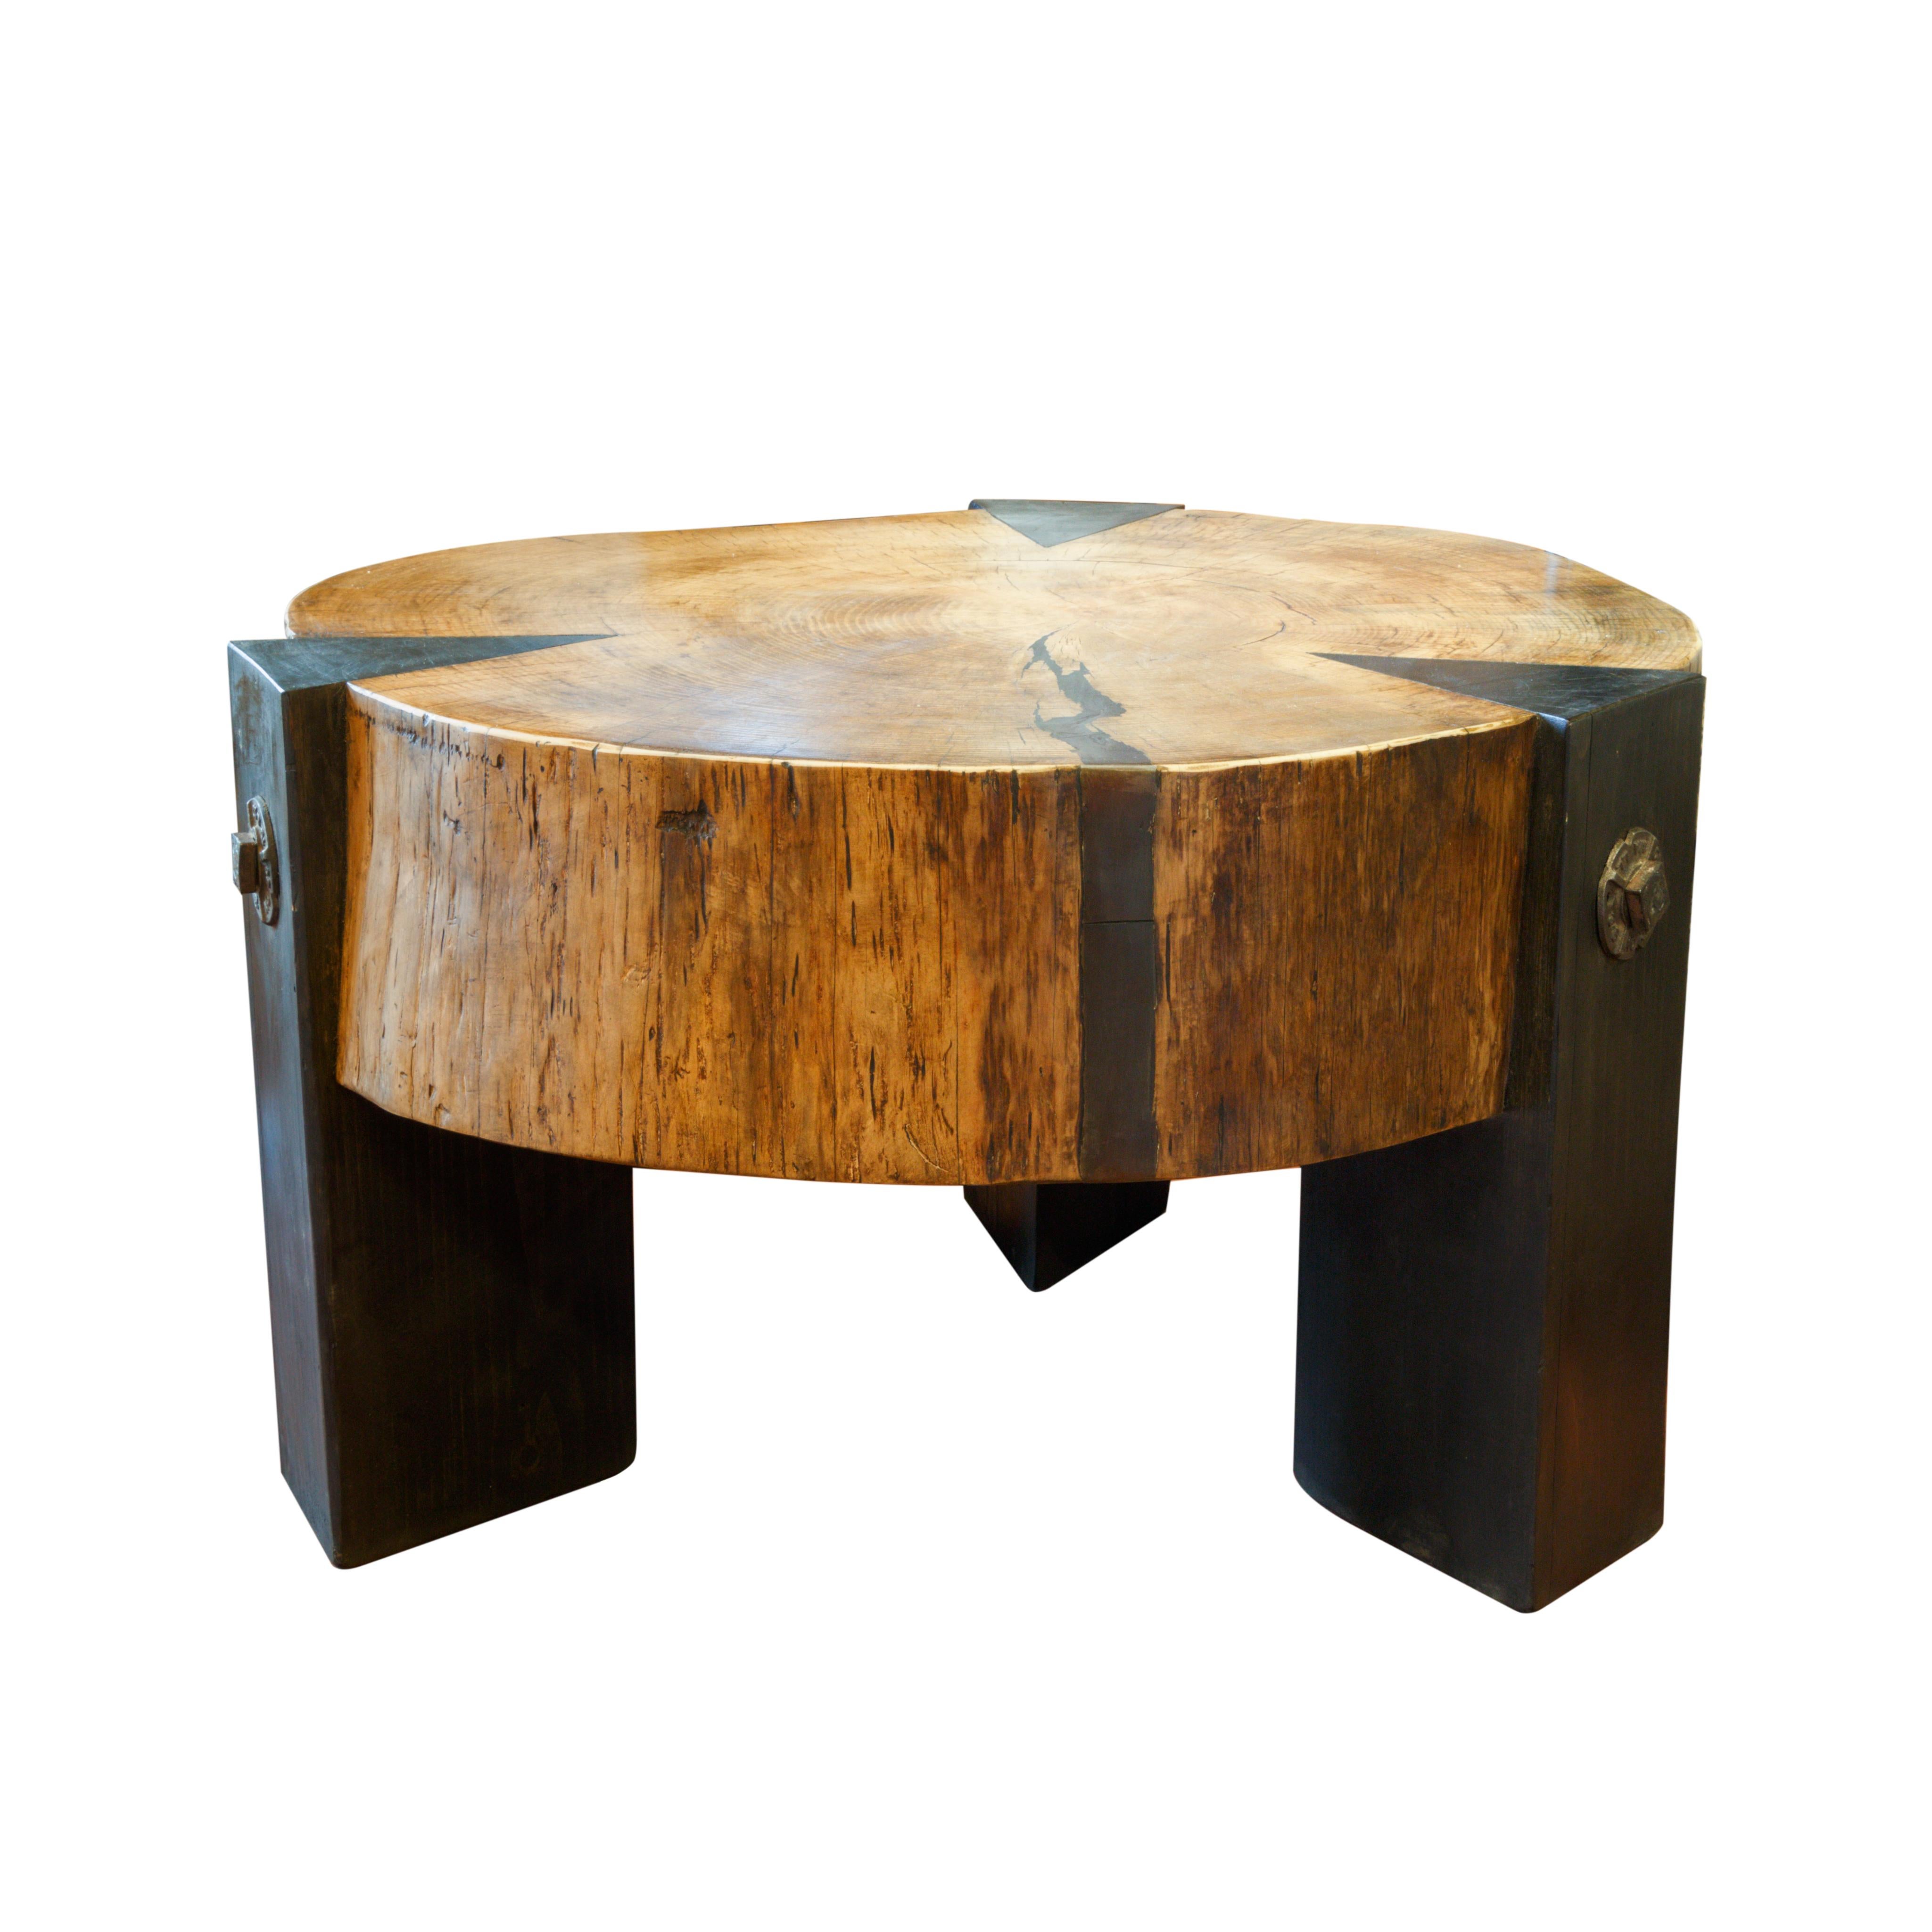 Made from a 100-year old pine round. Triangle legs from reclaimed mining beams attached with heavy wrought iron bolt.

Period: Contemporary

Origin: Cisco's, Idaho

Size: 24